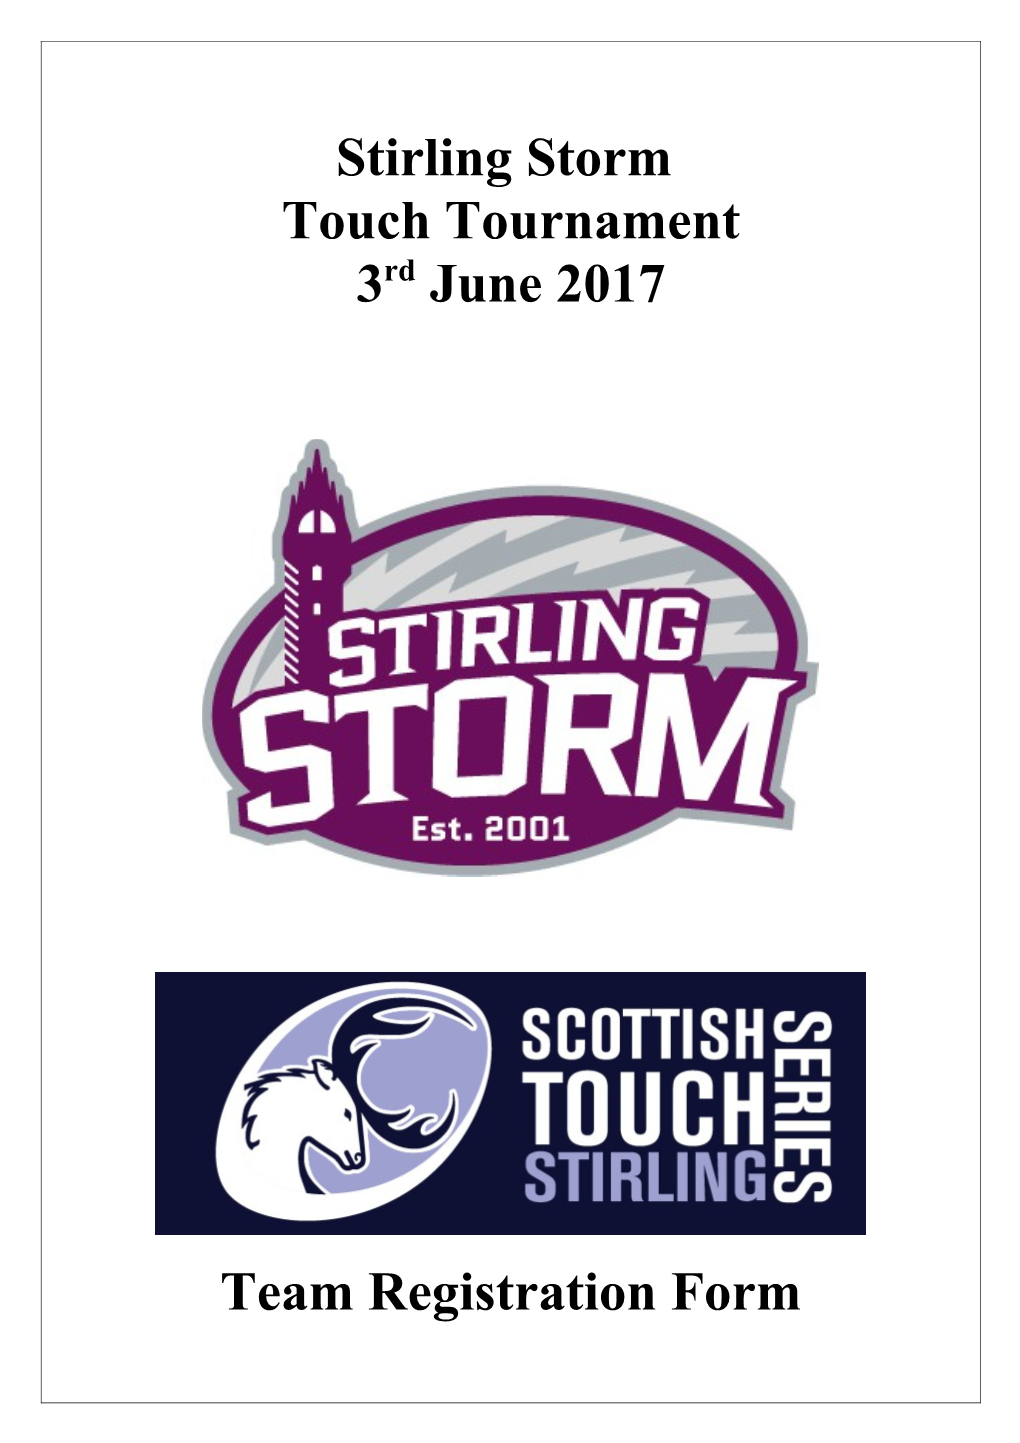 Stirling Touch Tournament